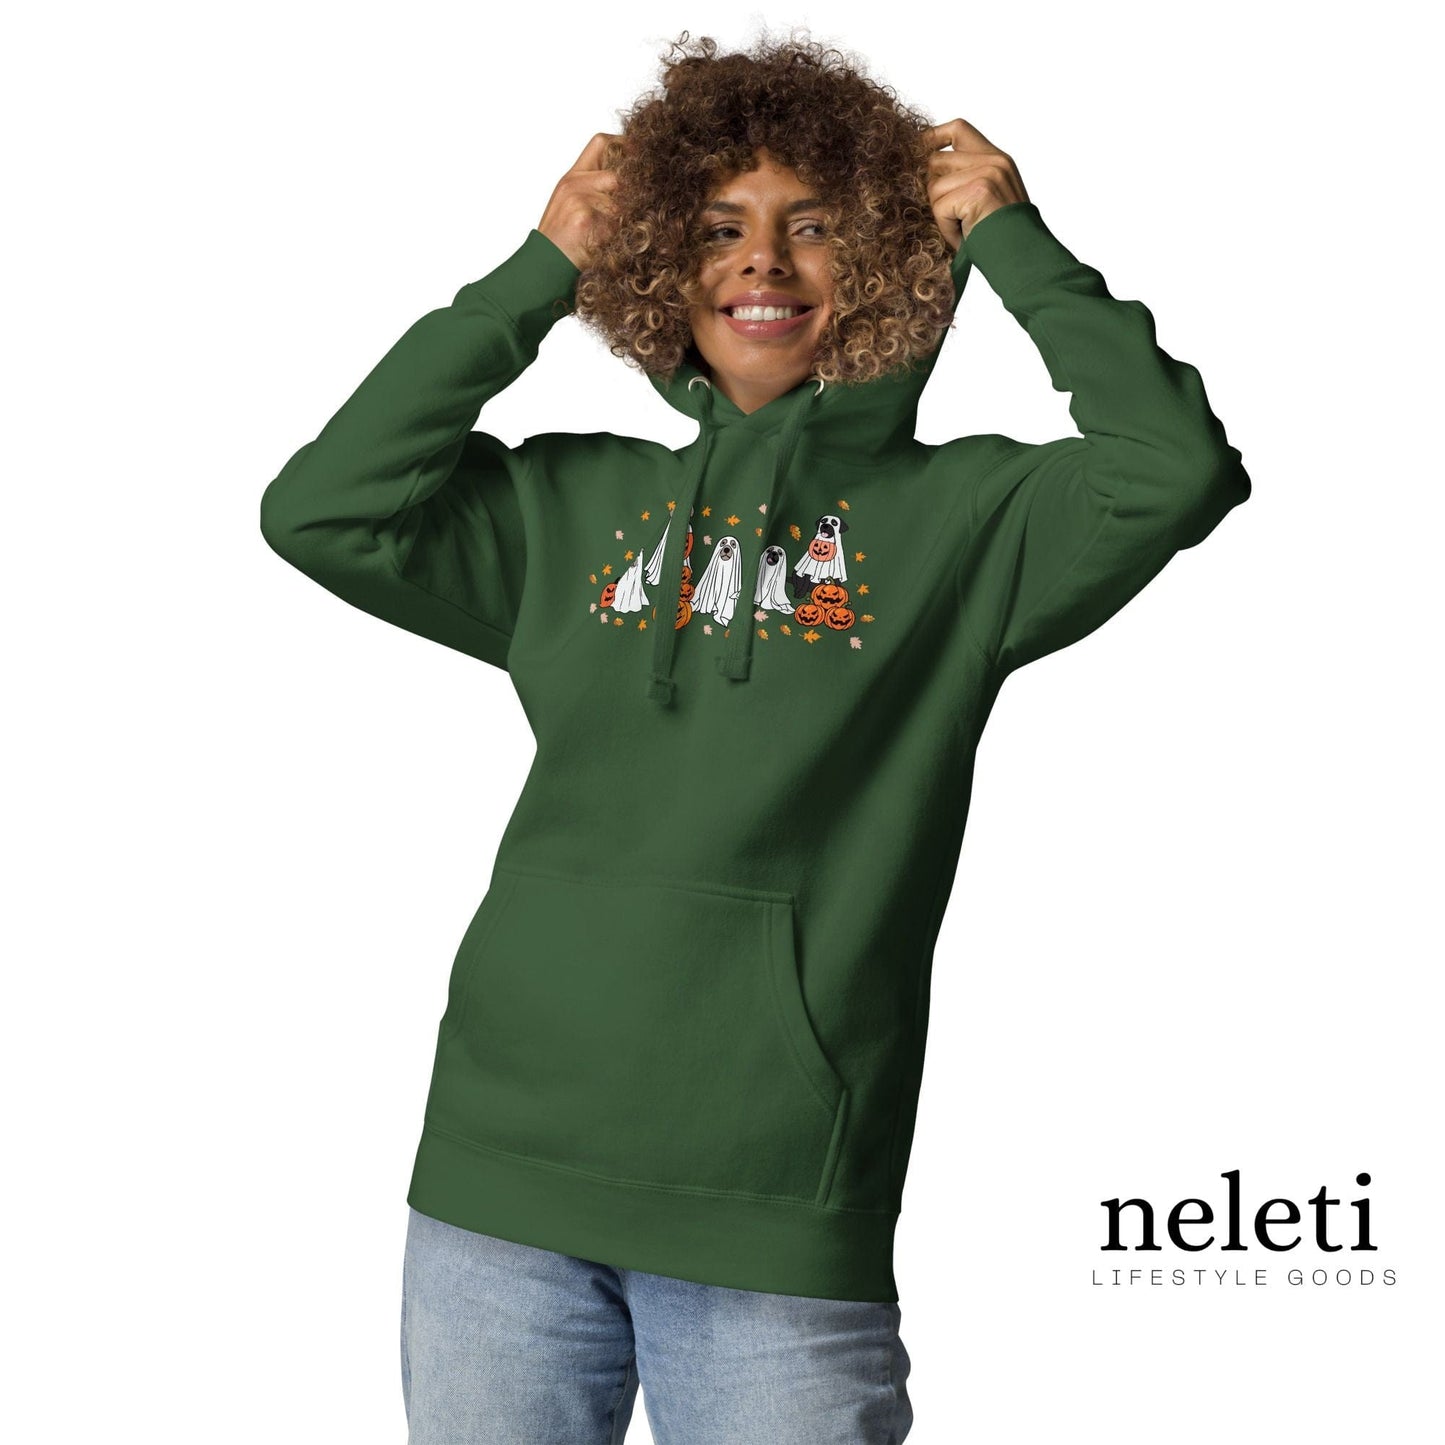 neleti.com-haloween-forest-green-hoodie-for-dog-lovers